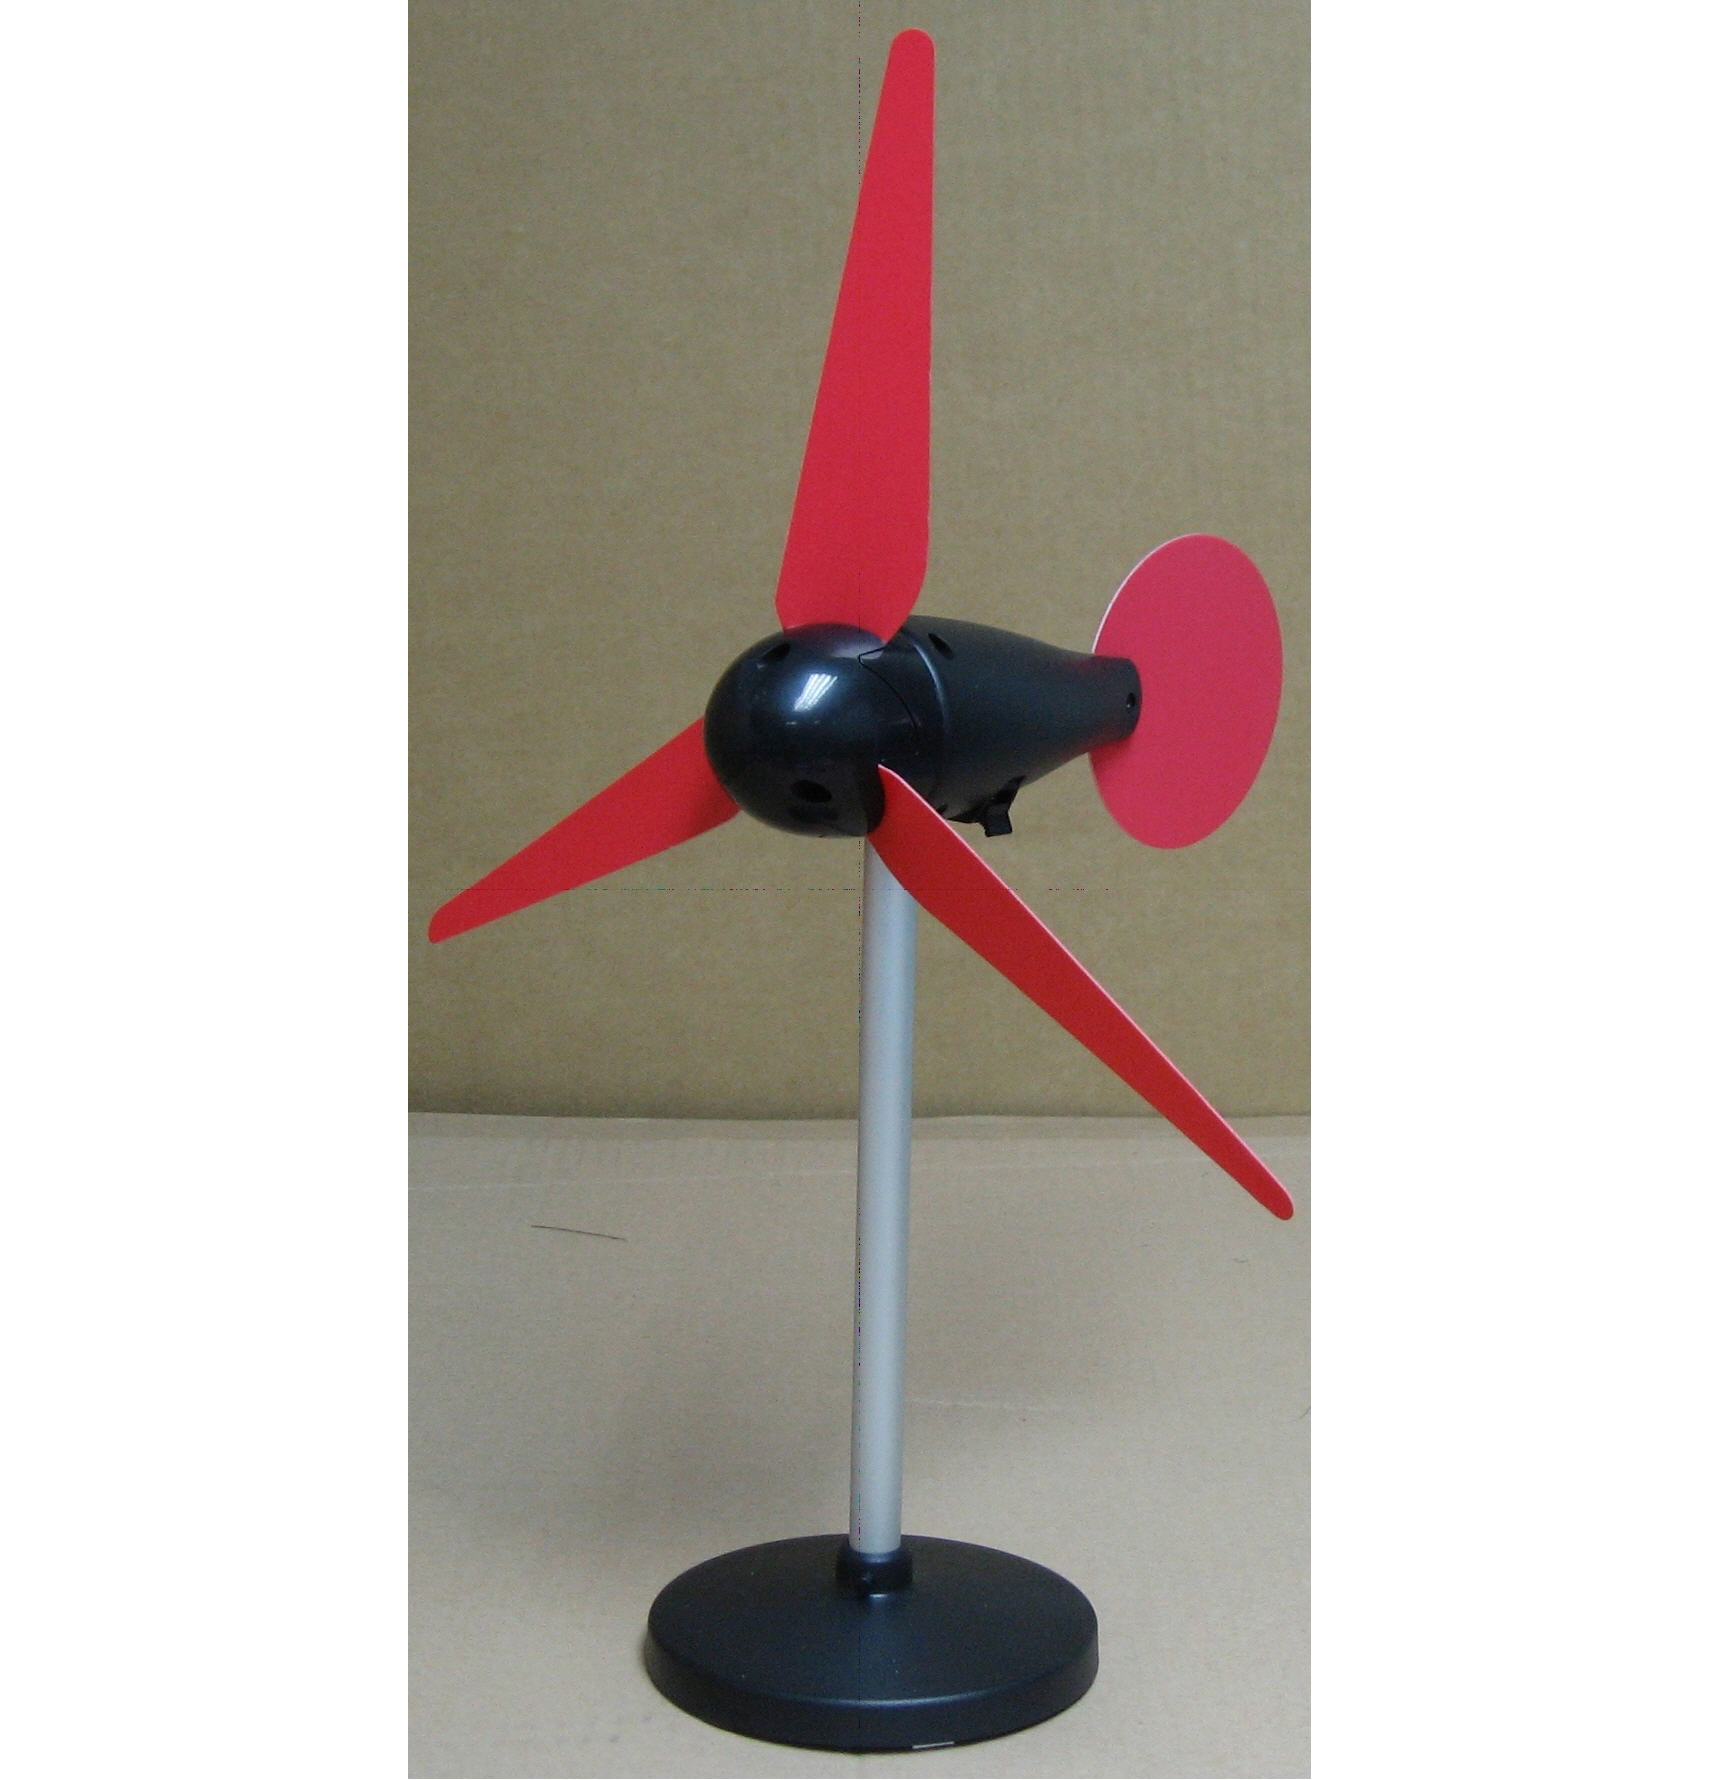 Mini Wind Turbine Charge is designed for charging rechargeable 